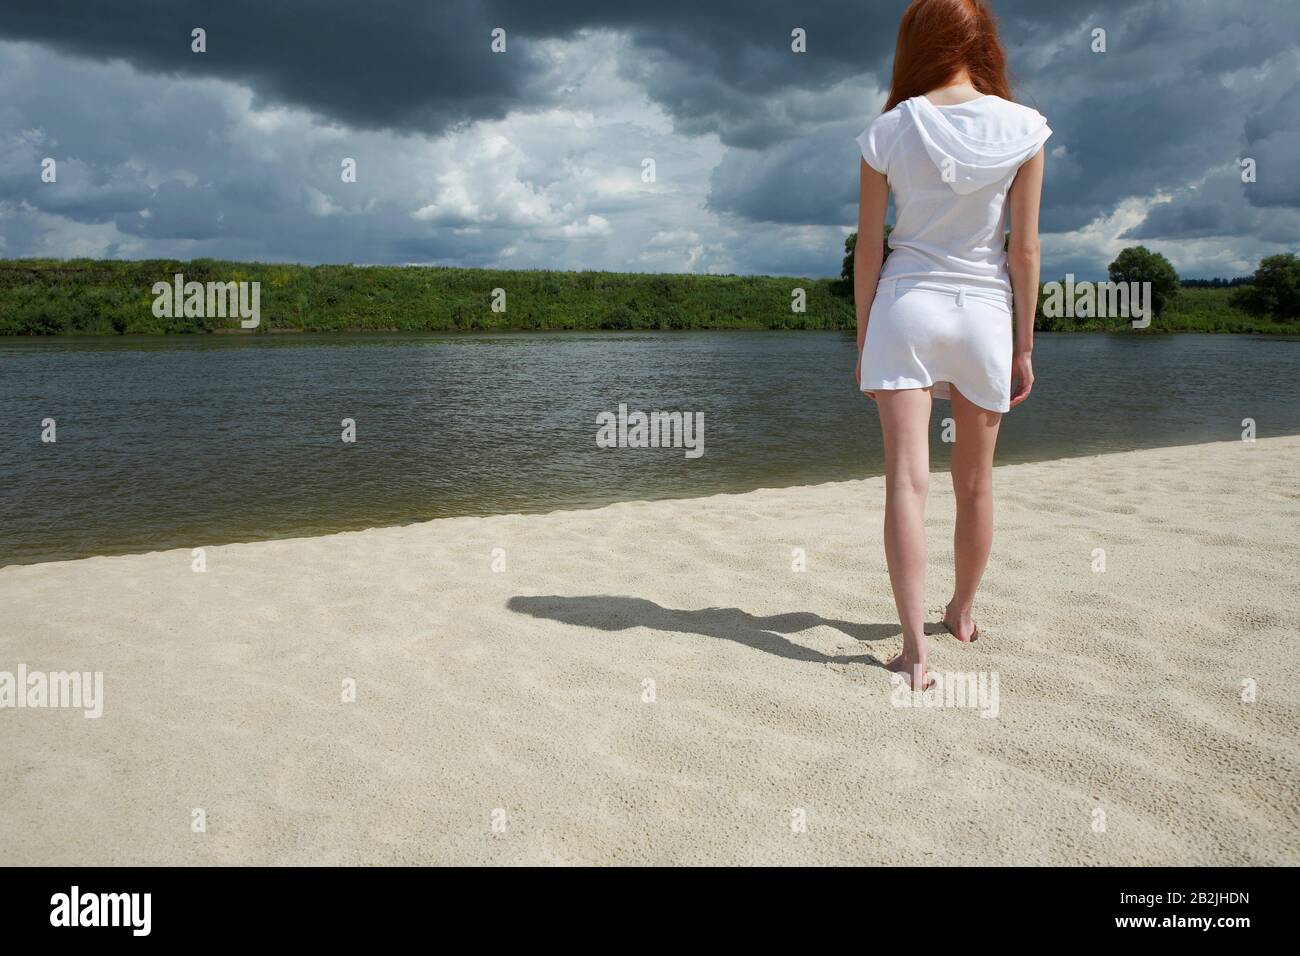 Woman Standing on Beach Along River Stock Photo